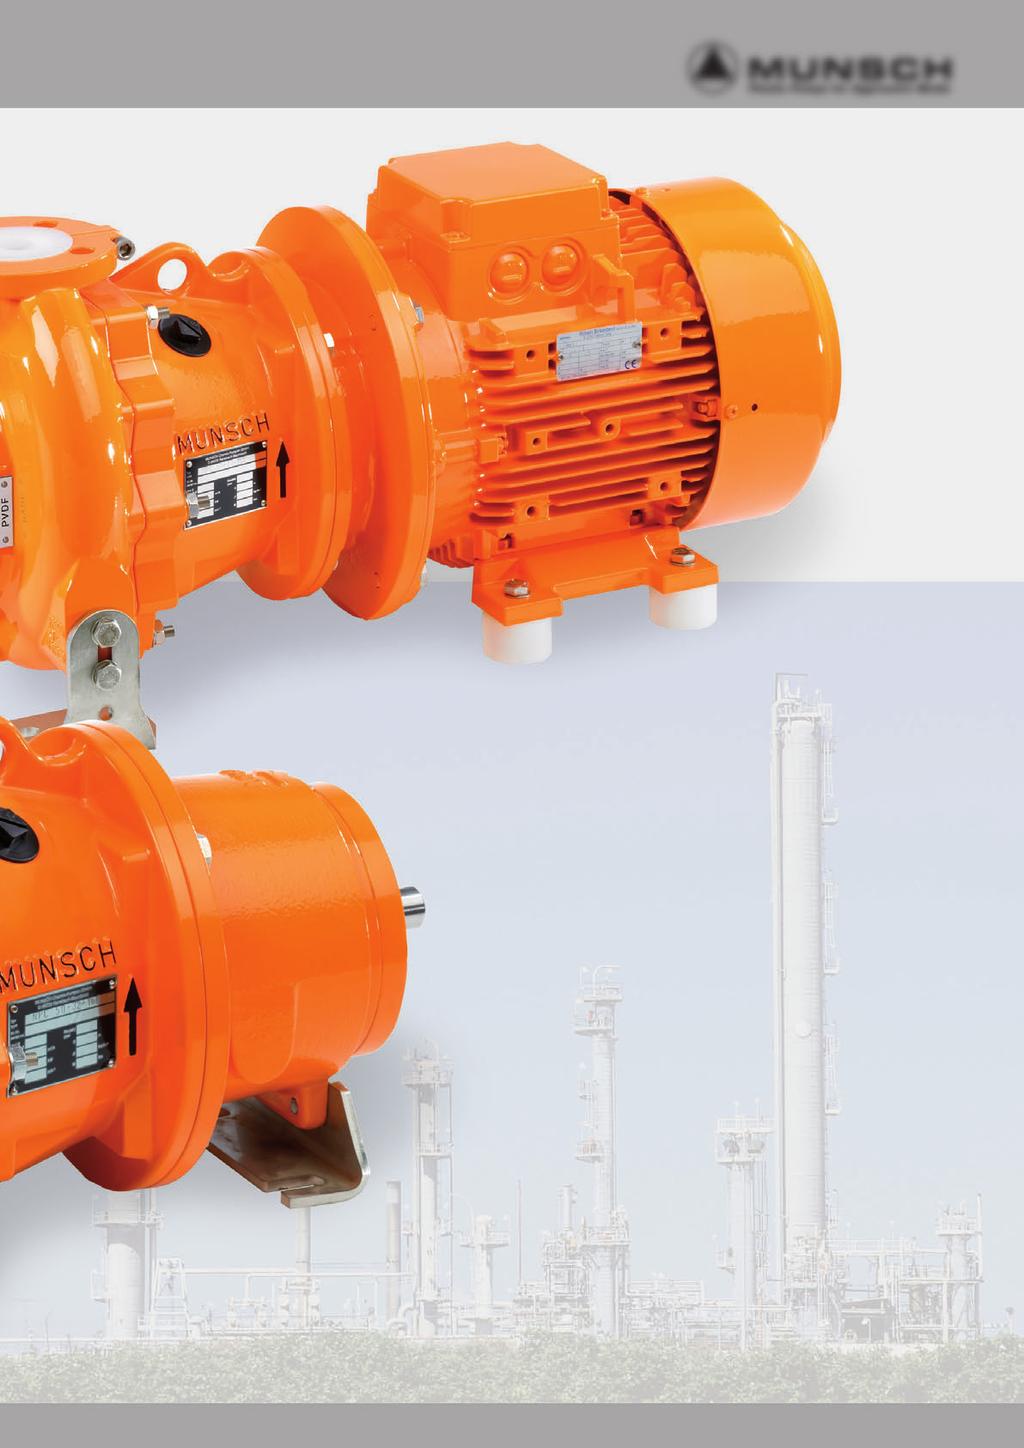 Materials Pump The non-metallic chemical pumps are available in PP, PVDF as well as in corrosion-resistant PFA for universal fluid compatibility.